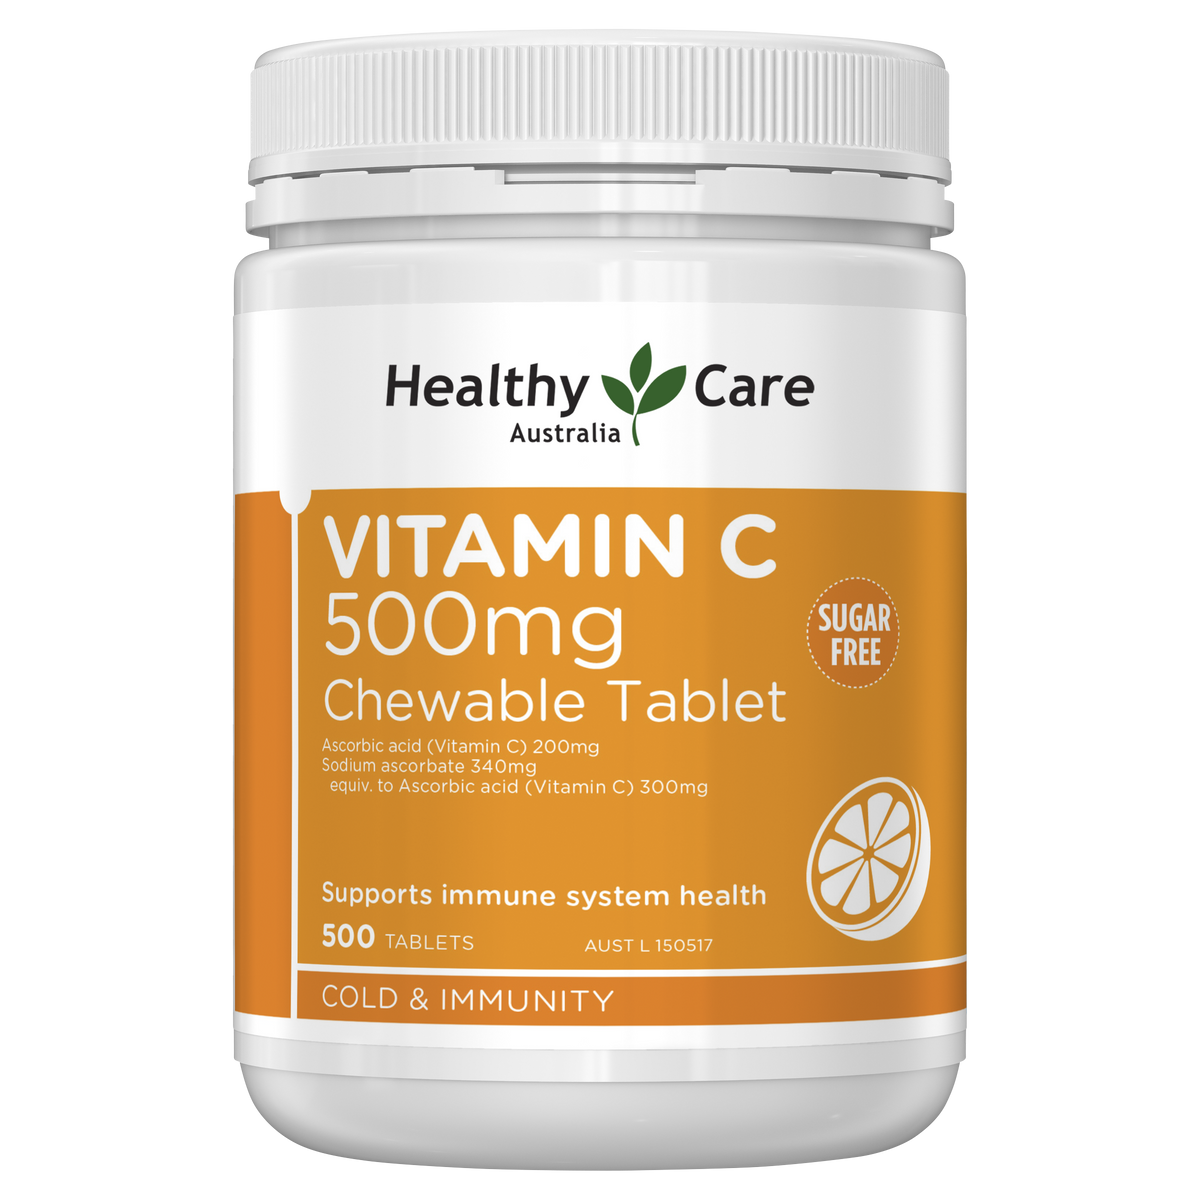 Healthy Care Vitamin C 500mg Chewable 500 Tablet